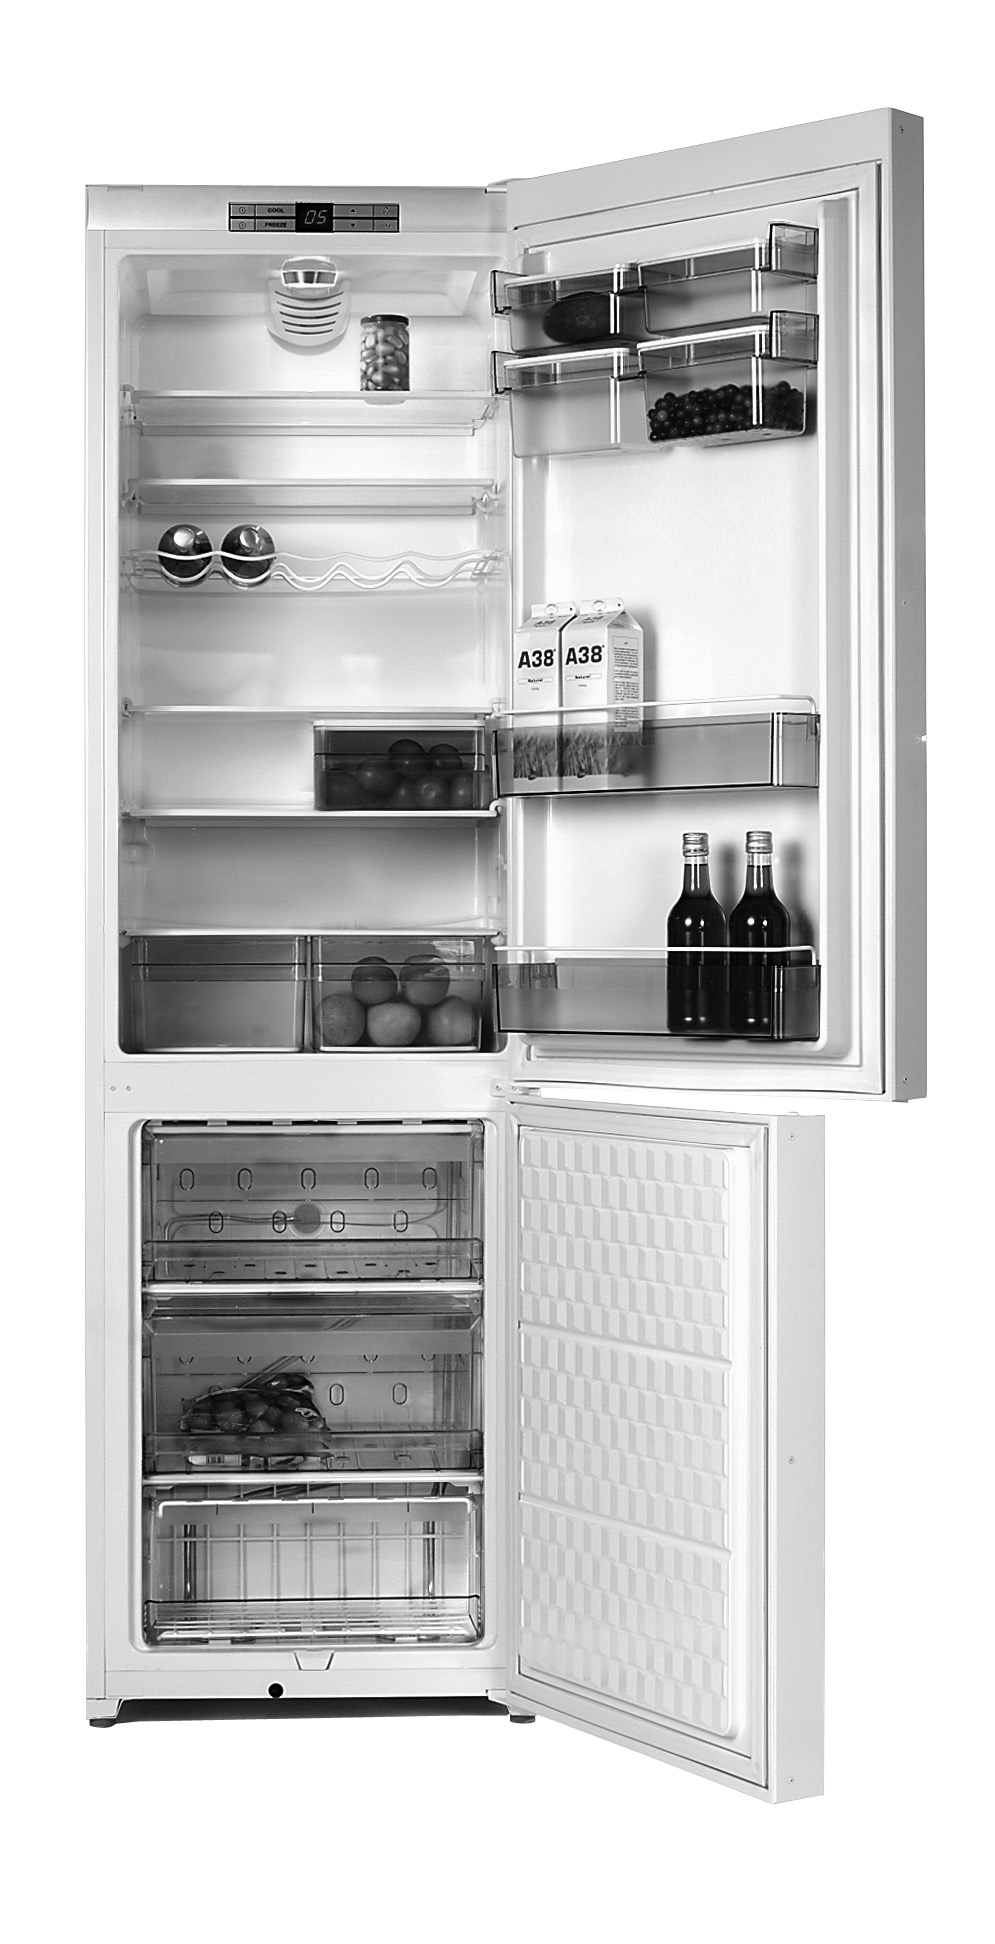 Description of the refrigerator/freezer GB The refrigerator/freezer is intended for use in a normal household. It is designed for temperature class SN-T in accordance with European standard EN 153.